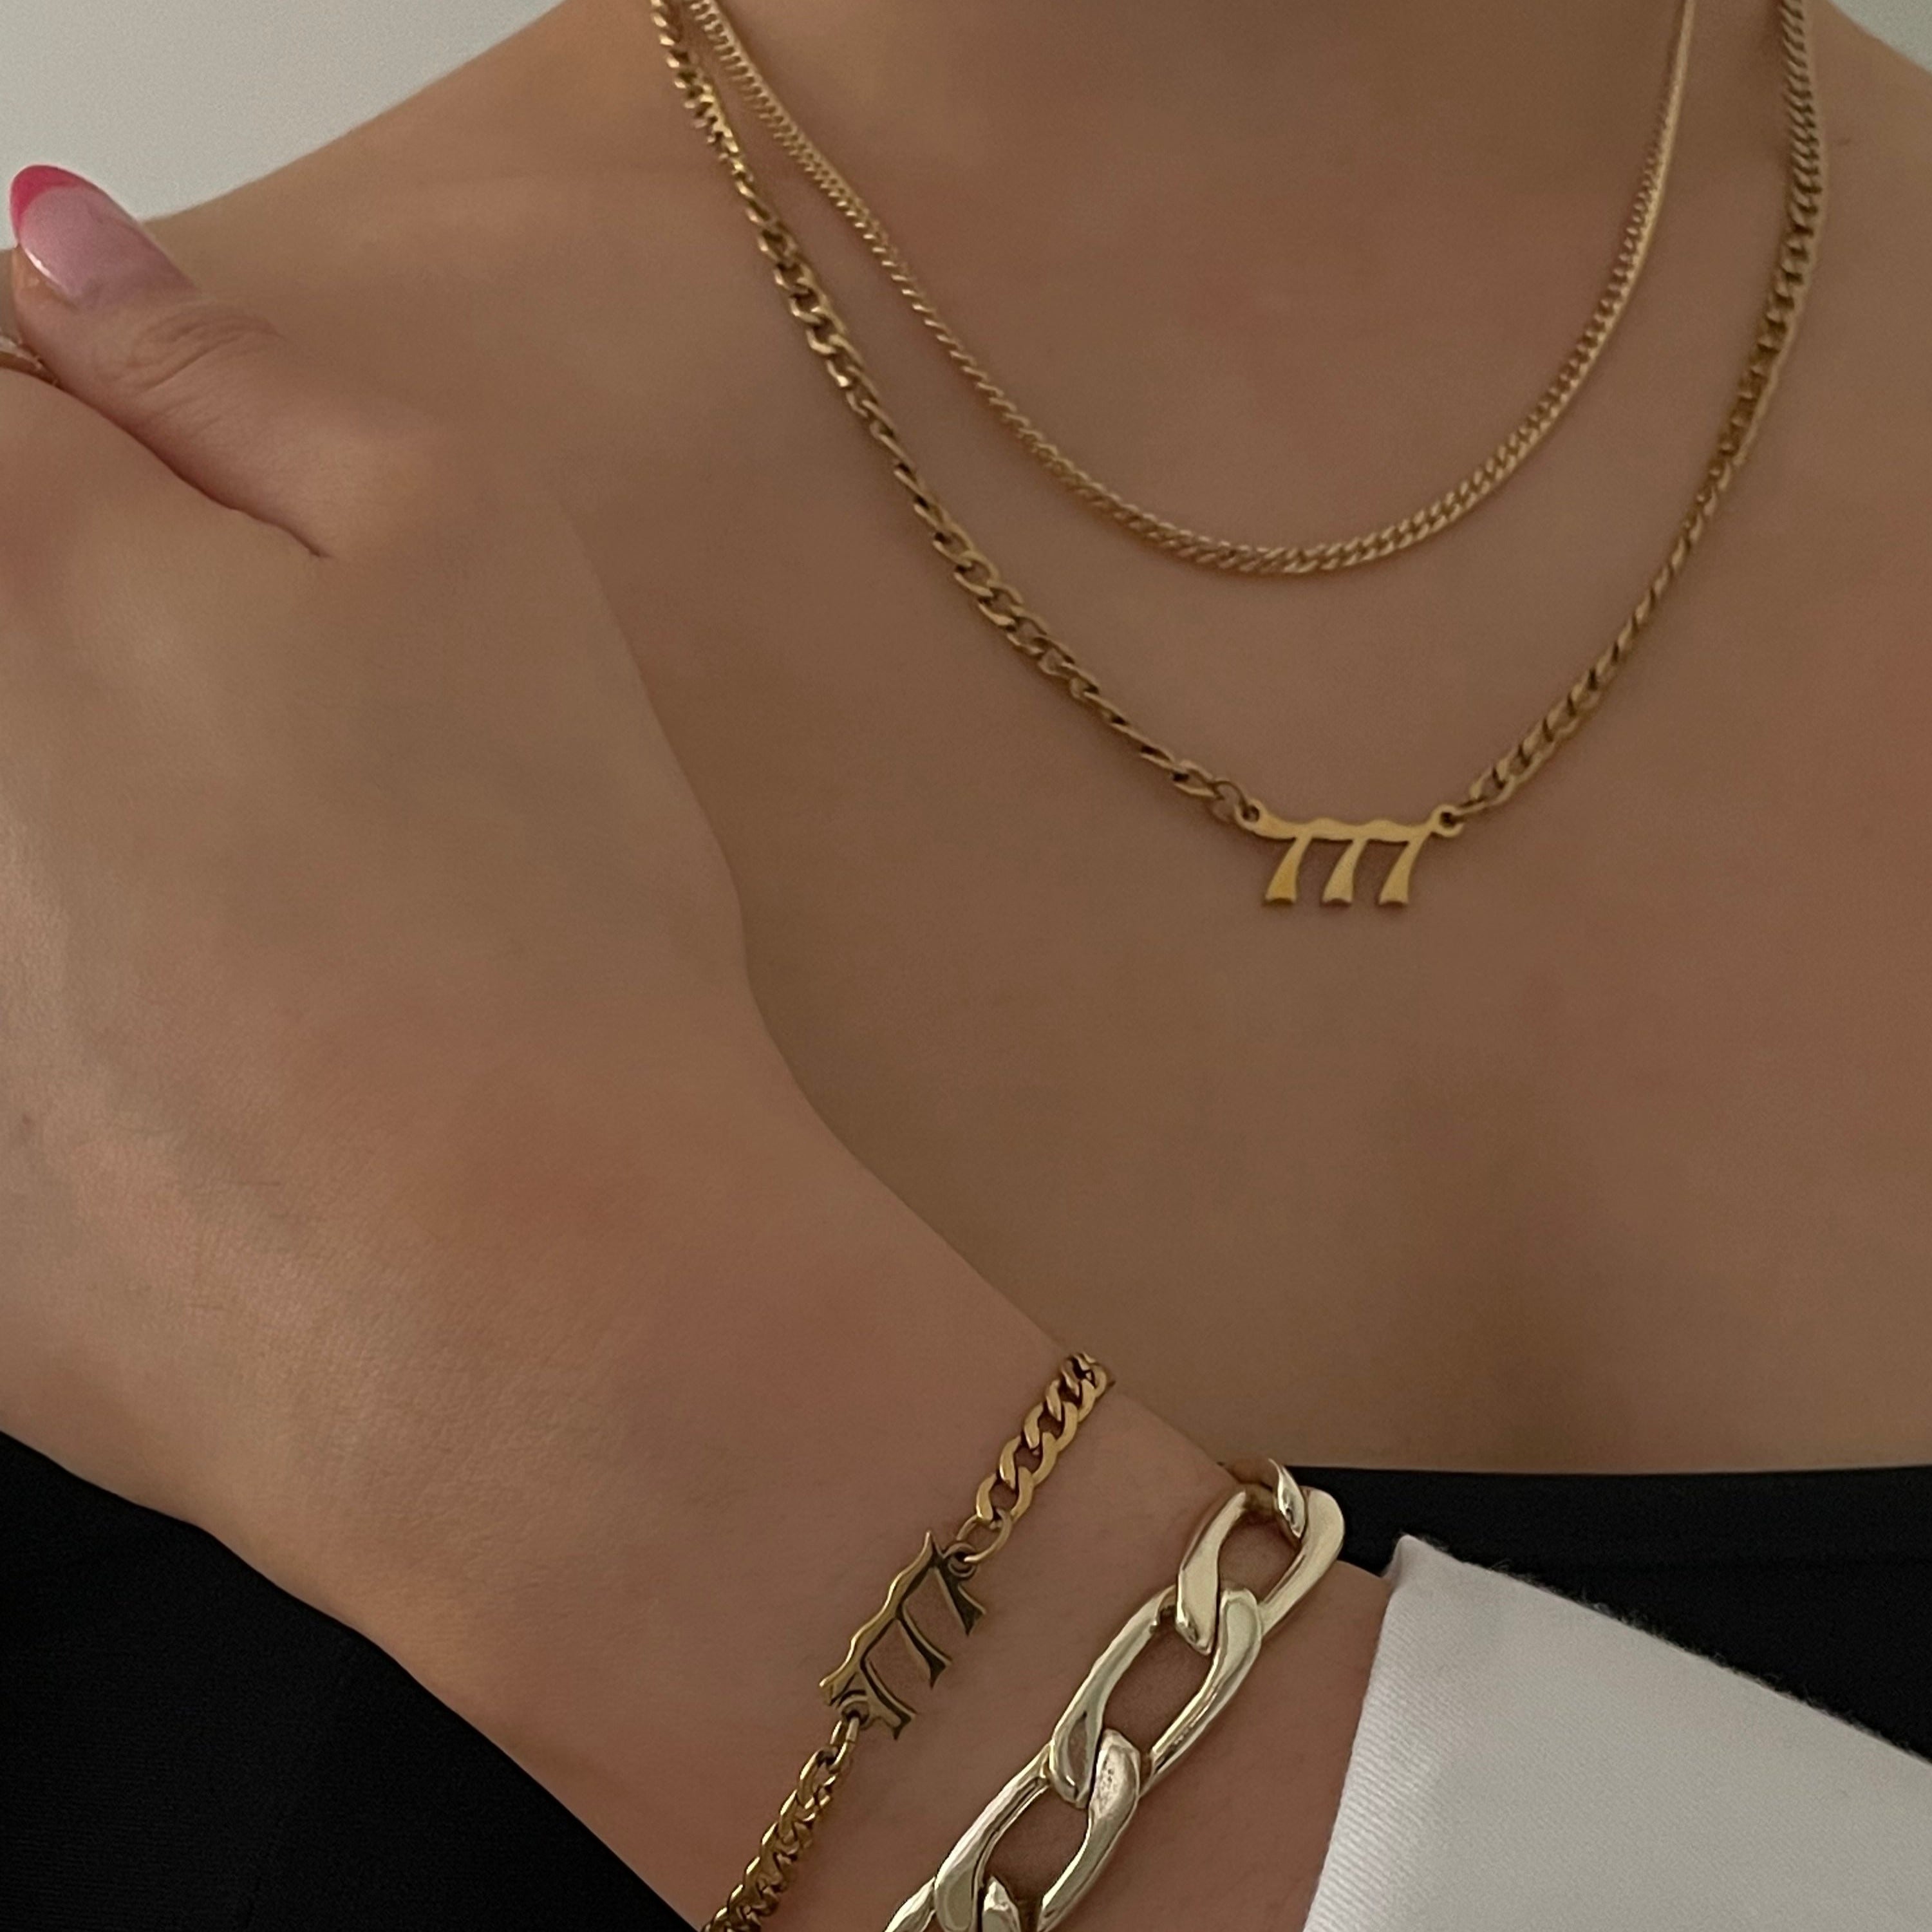 Just A Touch Necklace | Gold – Uncommon James by Kristin Cavallari |  Necklace, Jewelry photoshoot, Jewelry trends